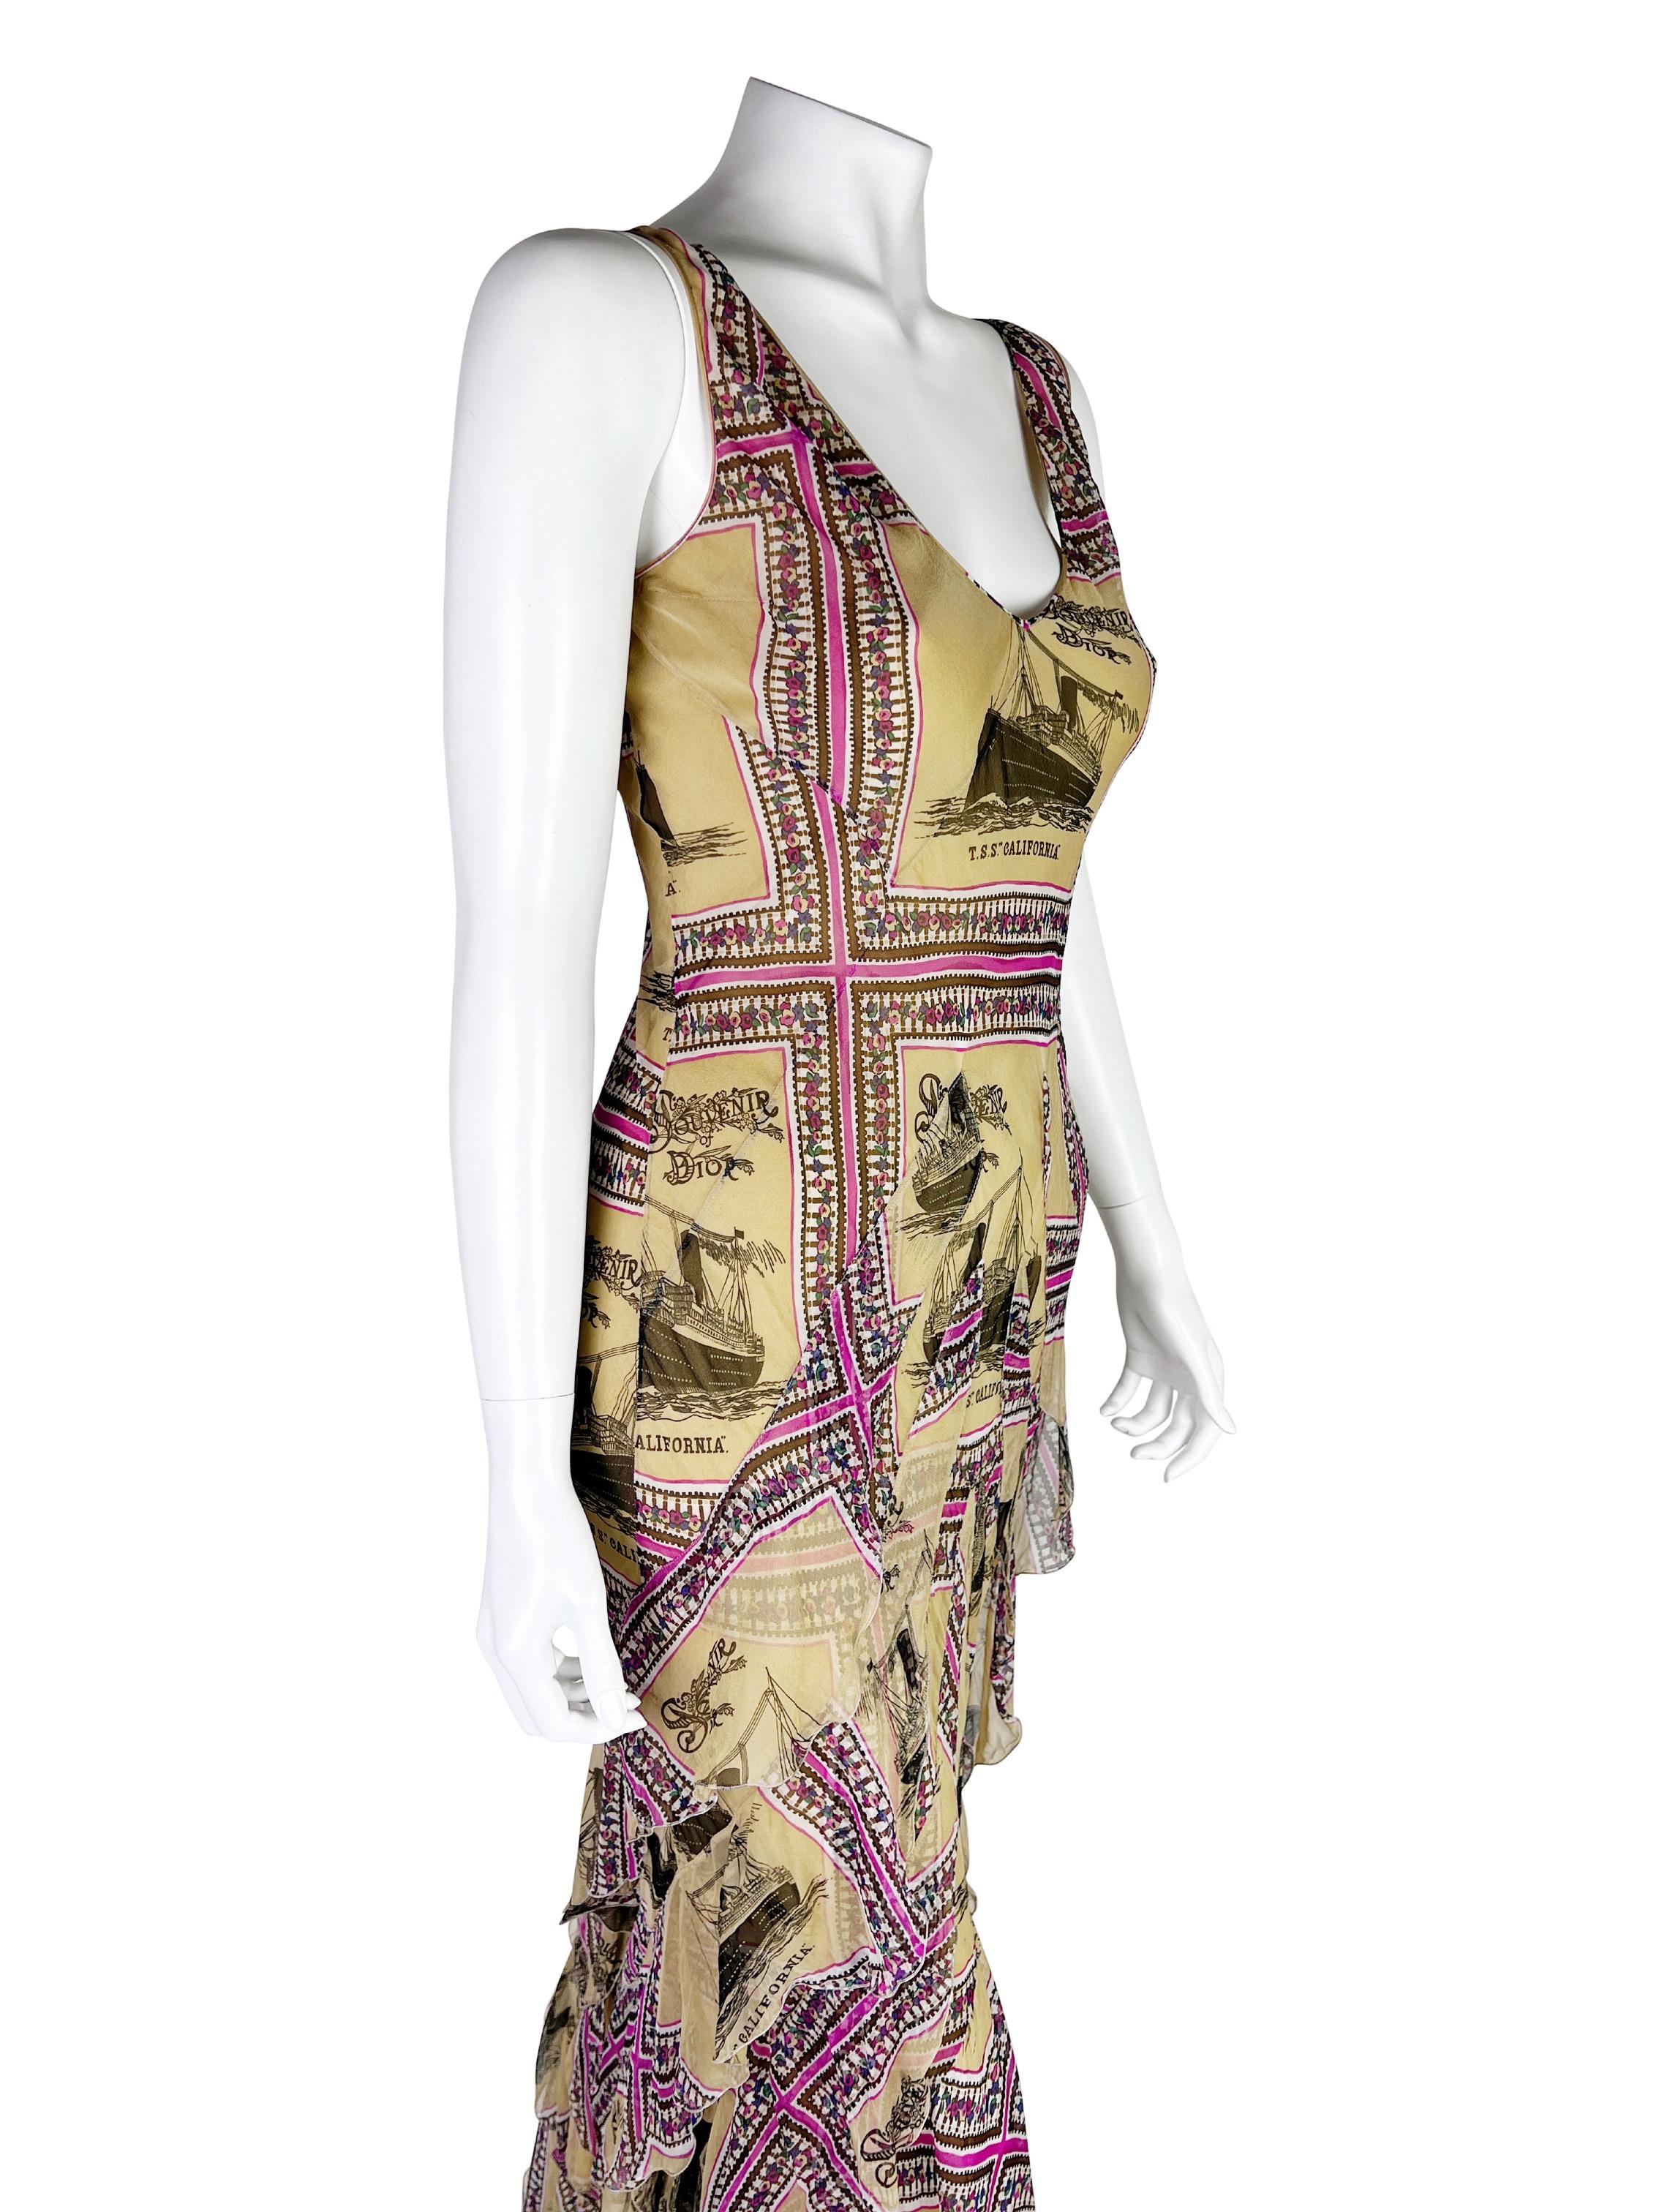 Dior by John Galliano Spring 2002 RTW Printed Silk Gown 2